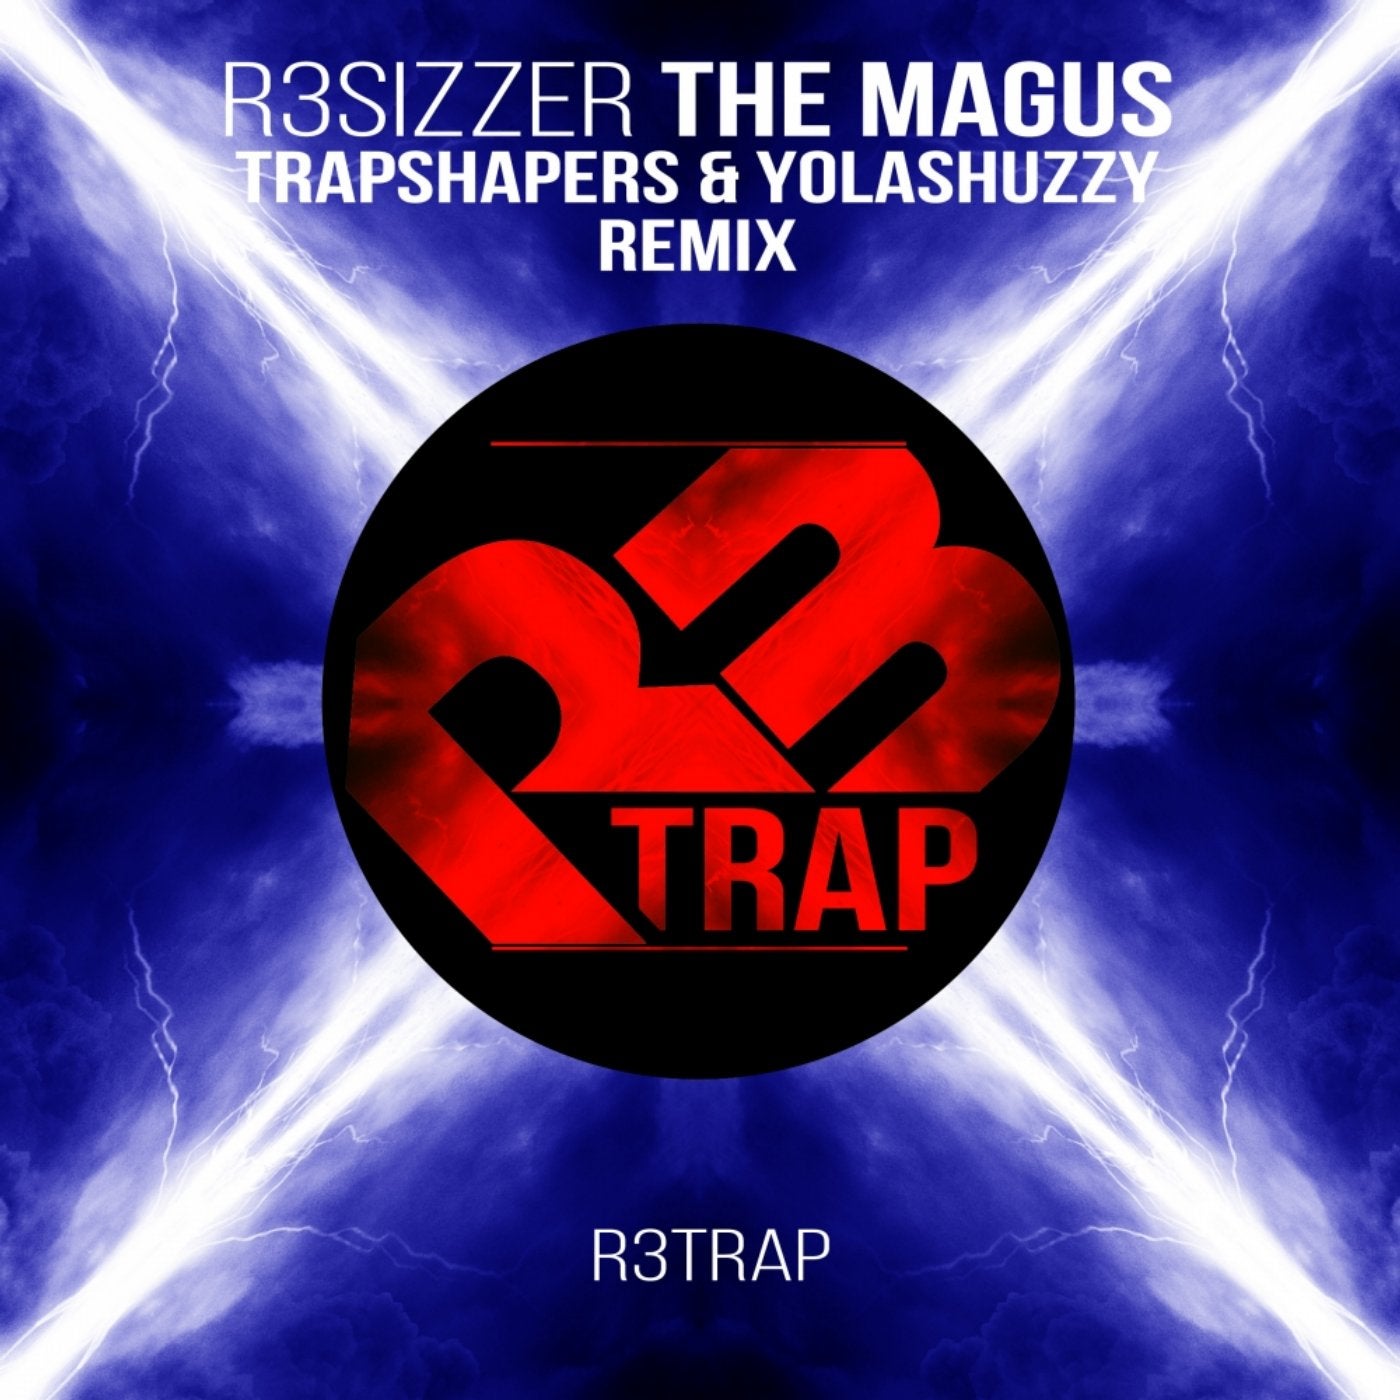 The Magus (Trapshapers & Yolashuzzy Remix)